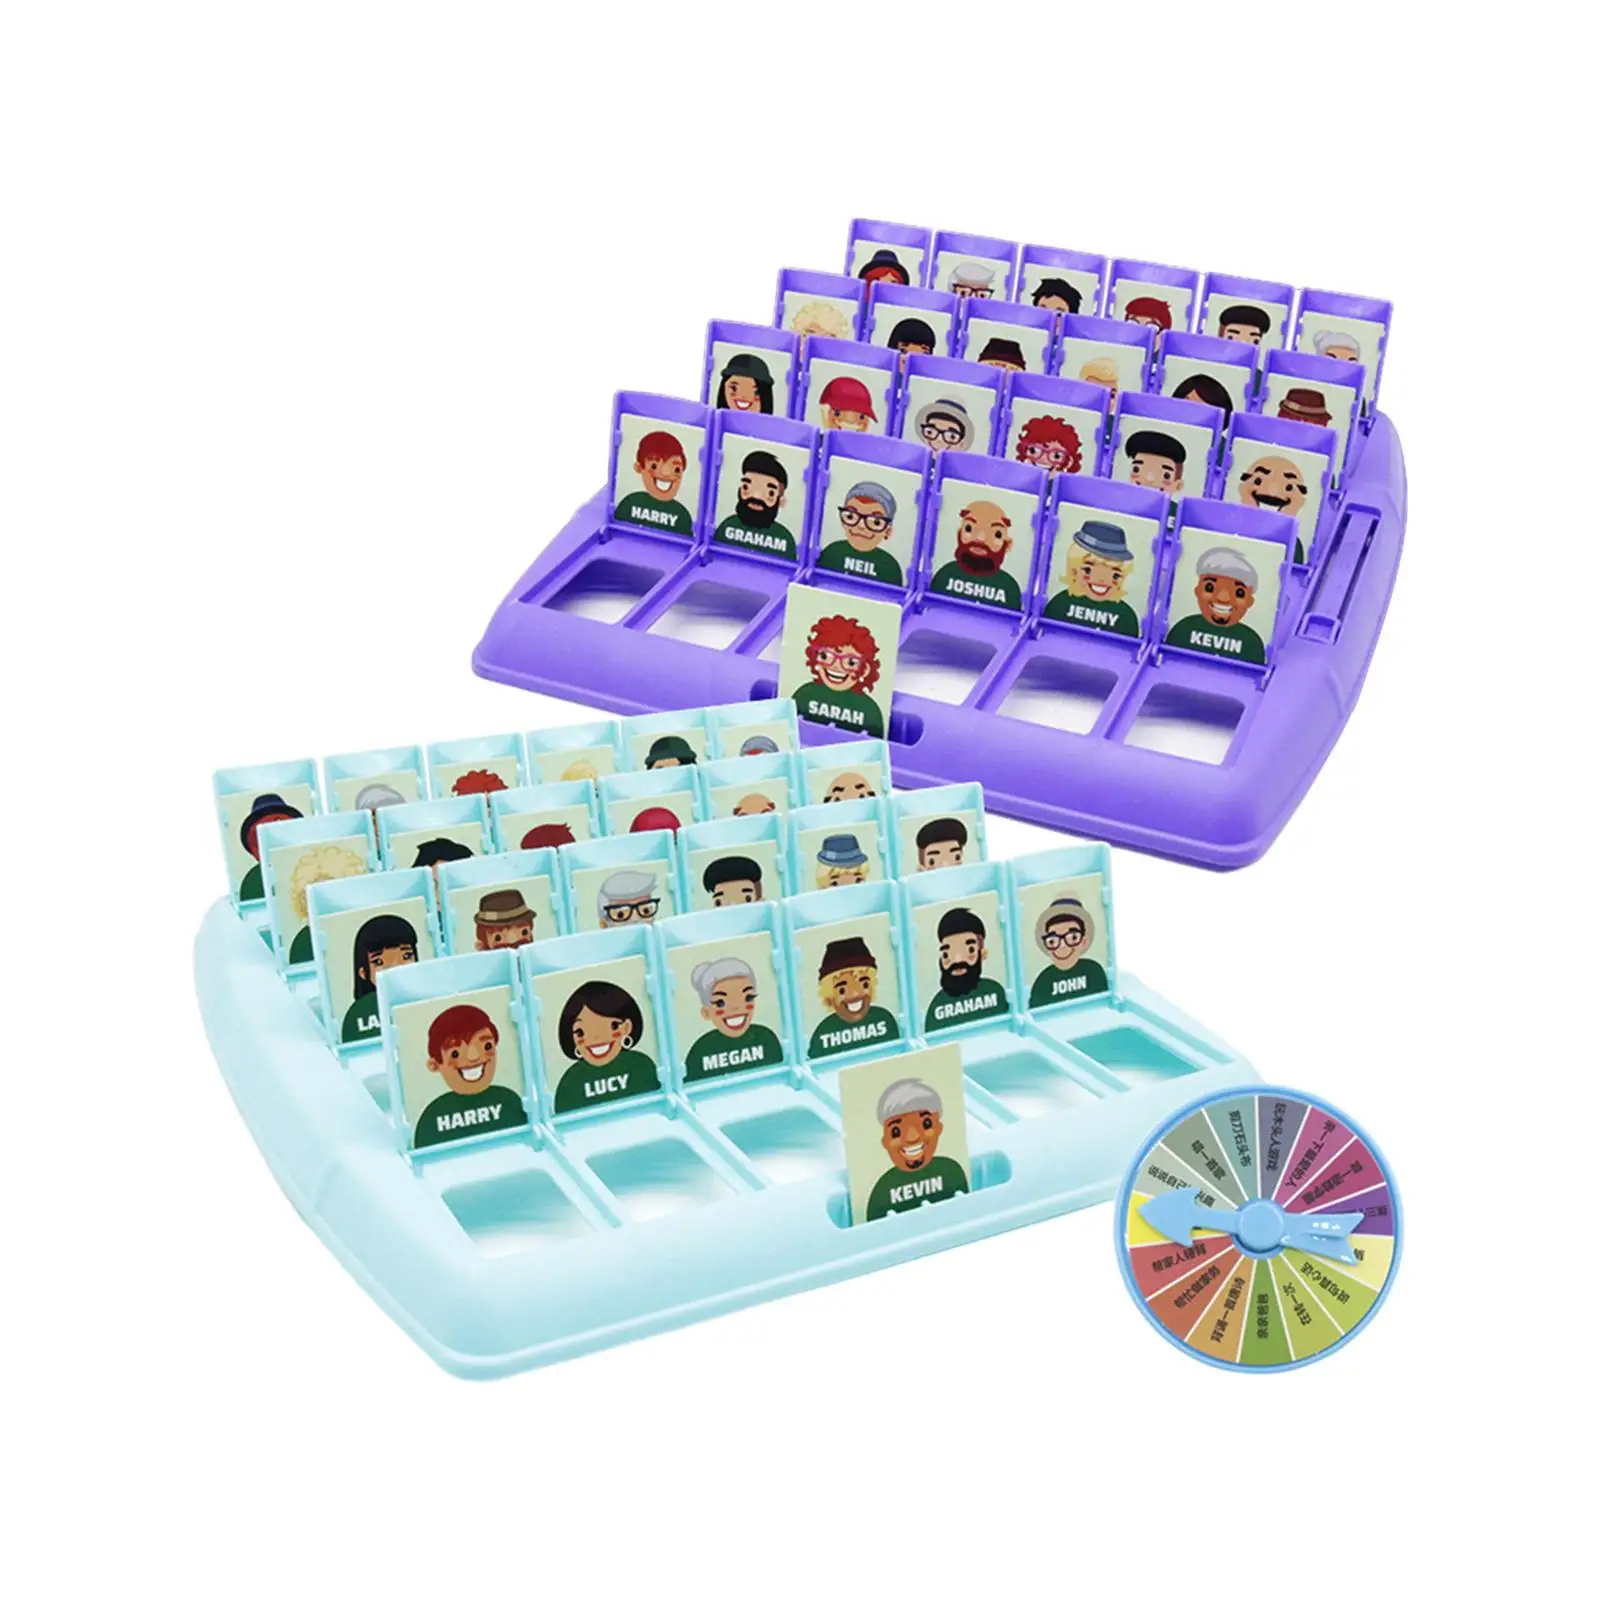 Guess Who i AM Logical Reasoning Abilities Reasoning Game Guessing Game for Girls Holiday Gifts Travel Games Party Prop Children